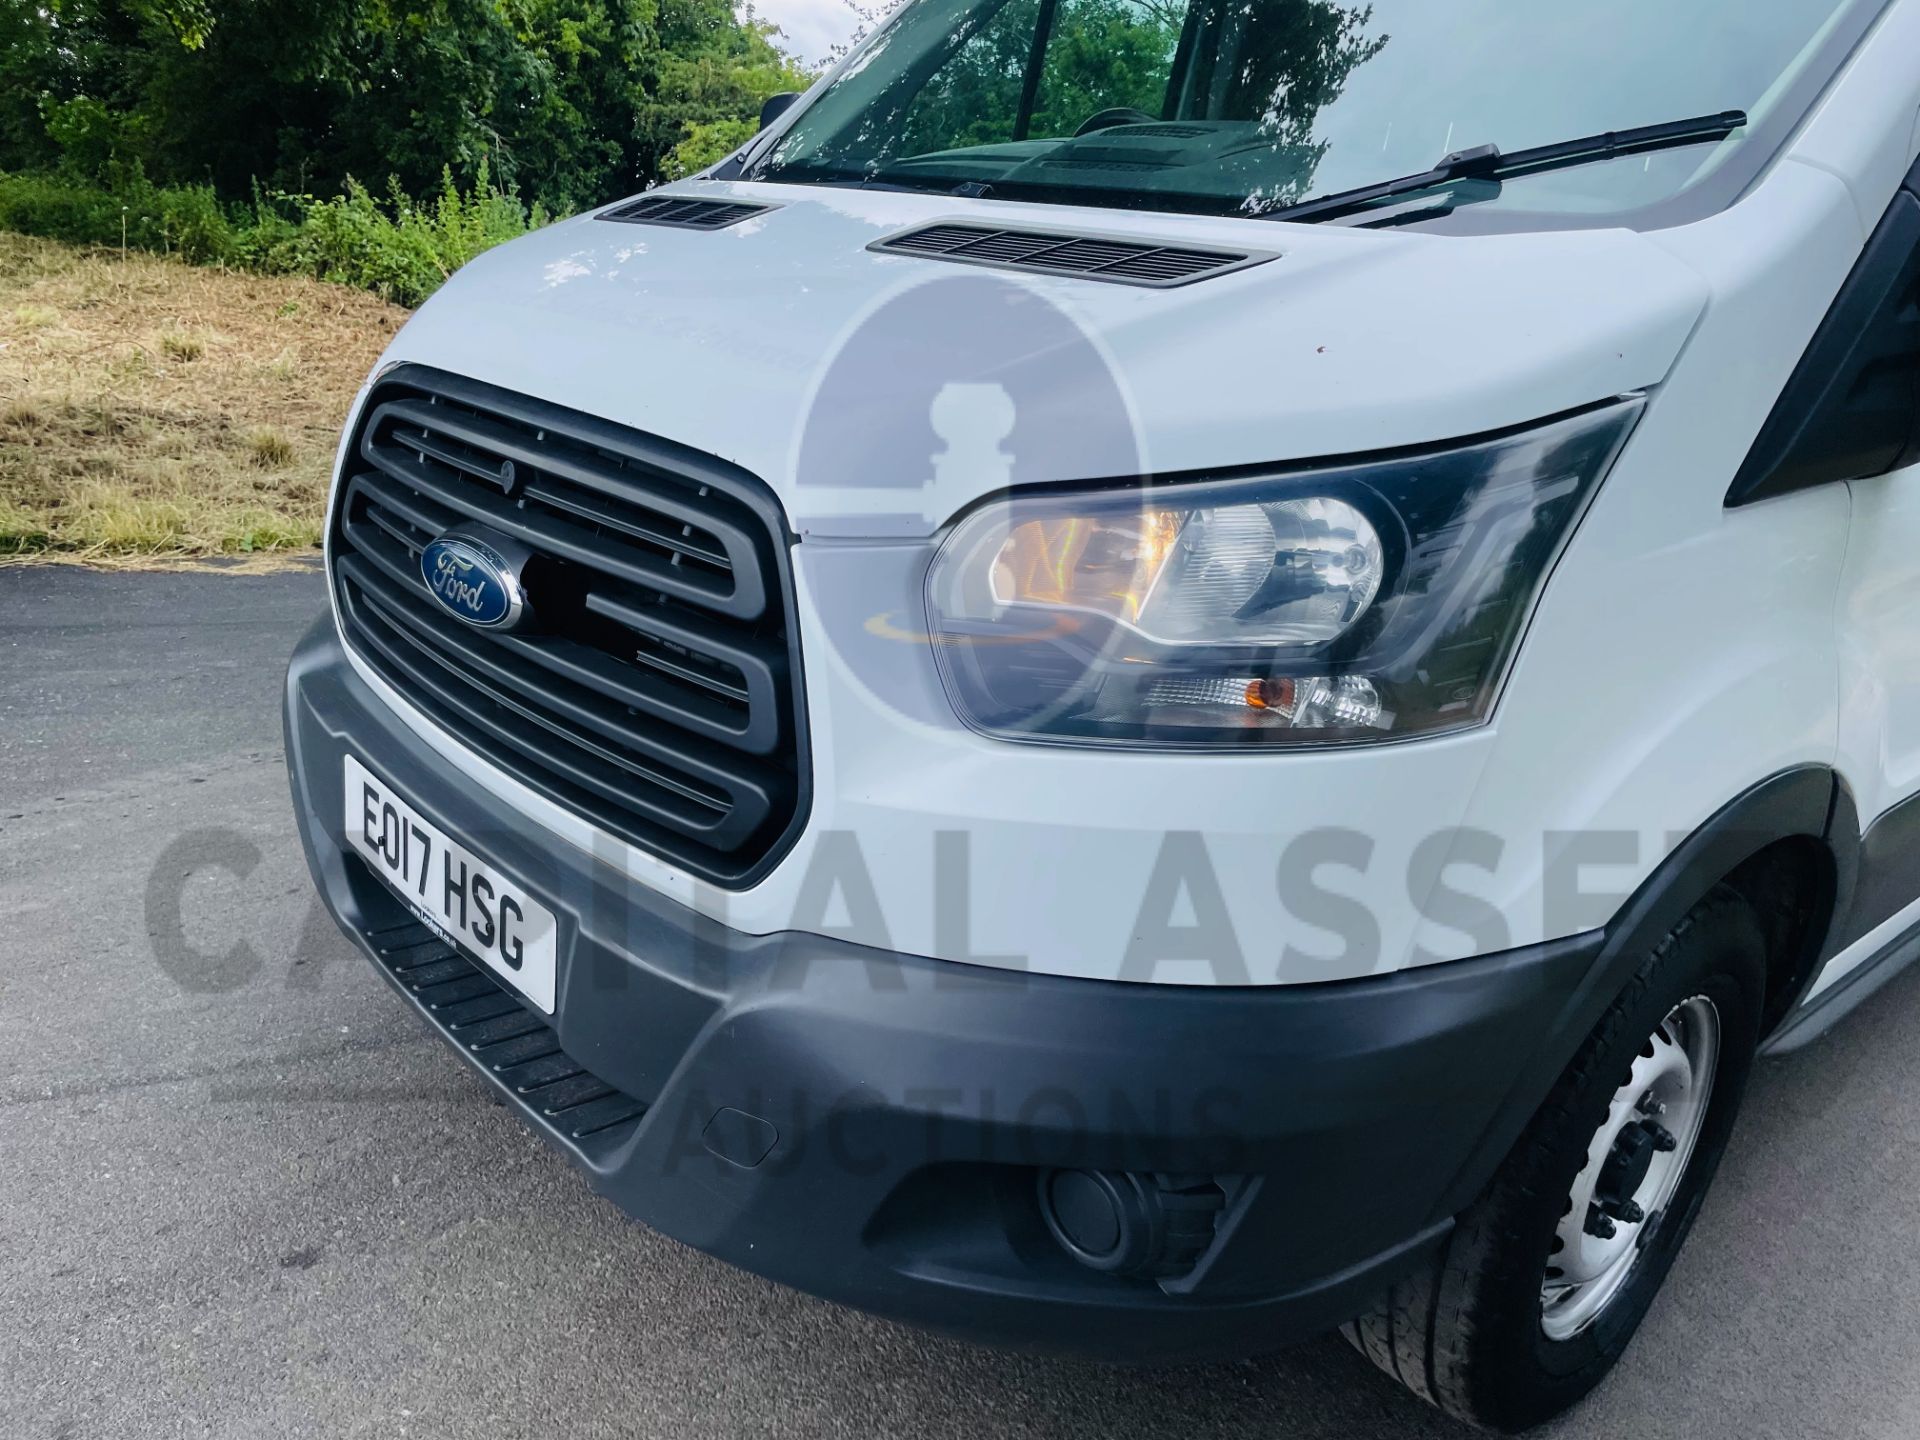 (On Sale) FORD TRANSIT 130 T350 *LWB -REFRIGERATED VAN* (2017 - EURO 6) 2.0 TDCI 'ECOBLUE' - 6 SPEED - Image 16 of 42